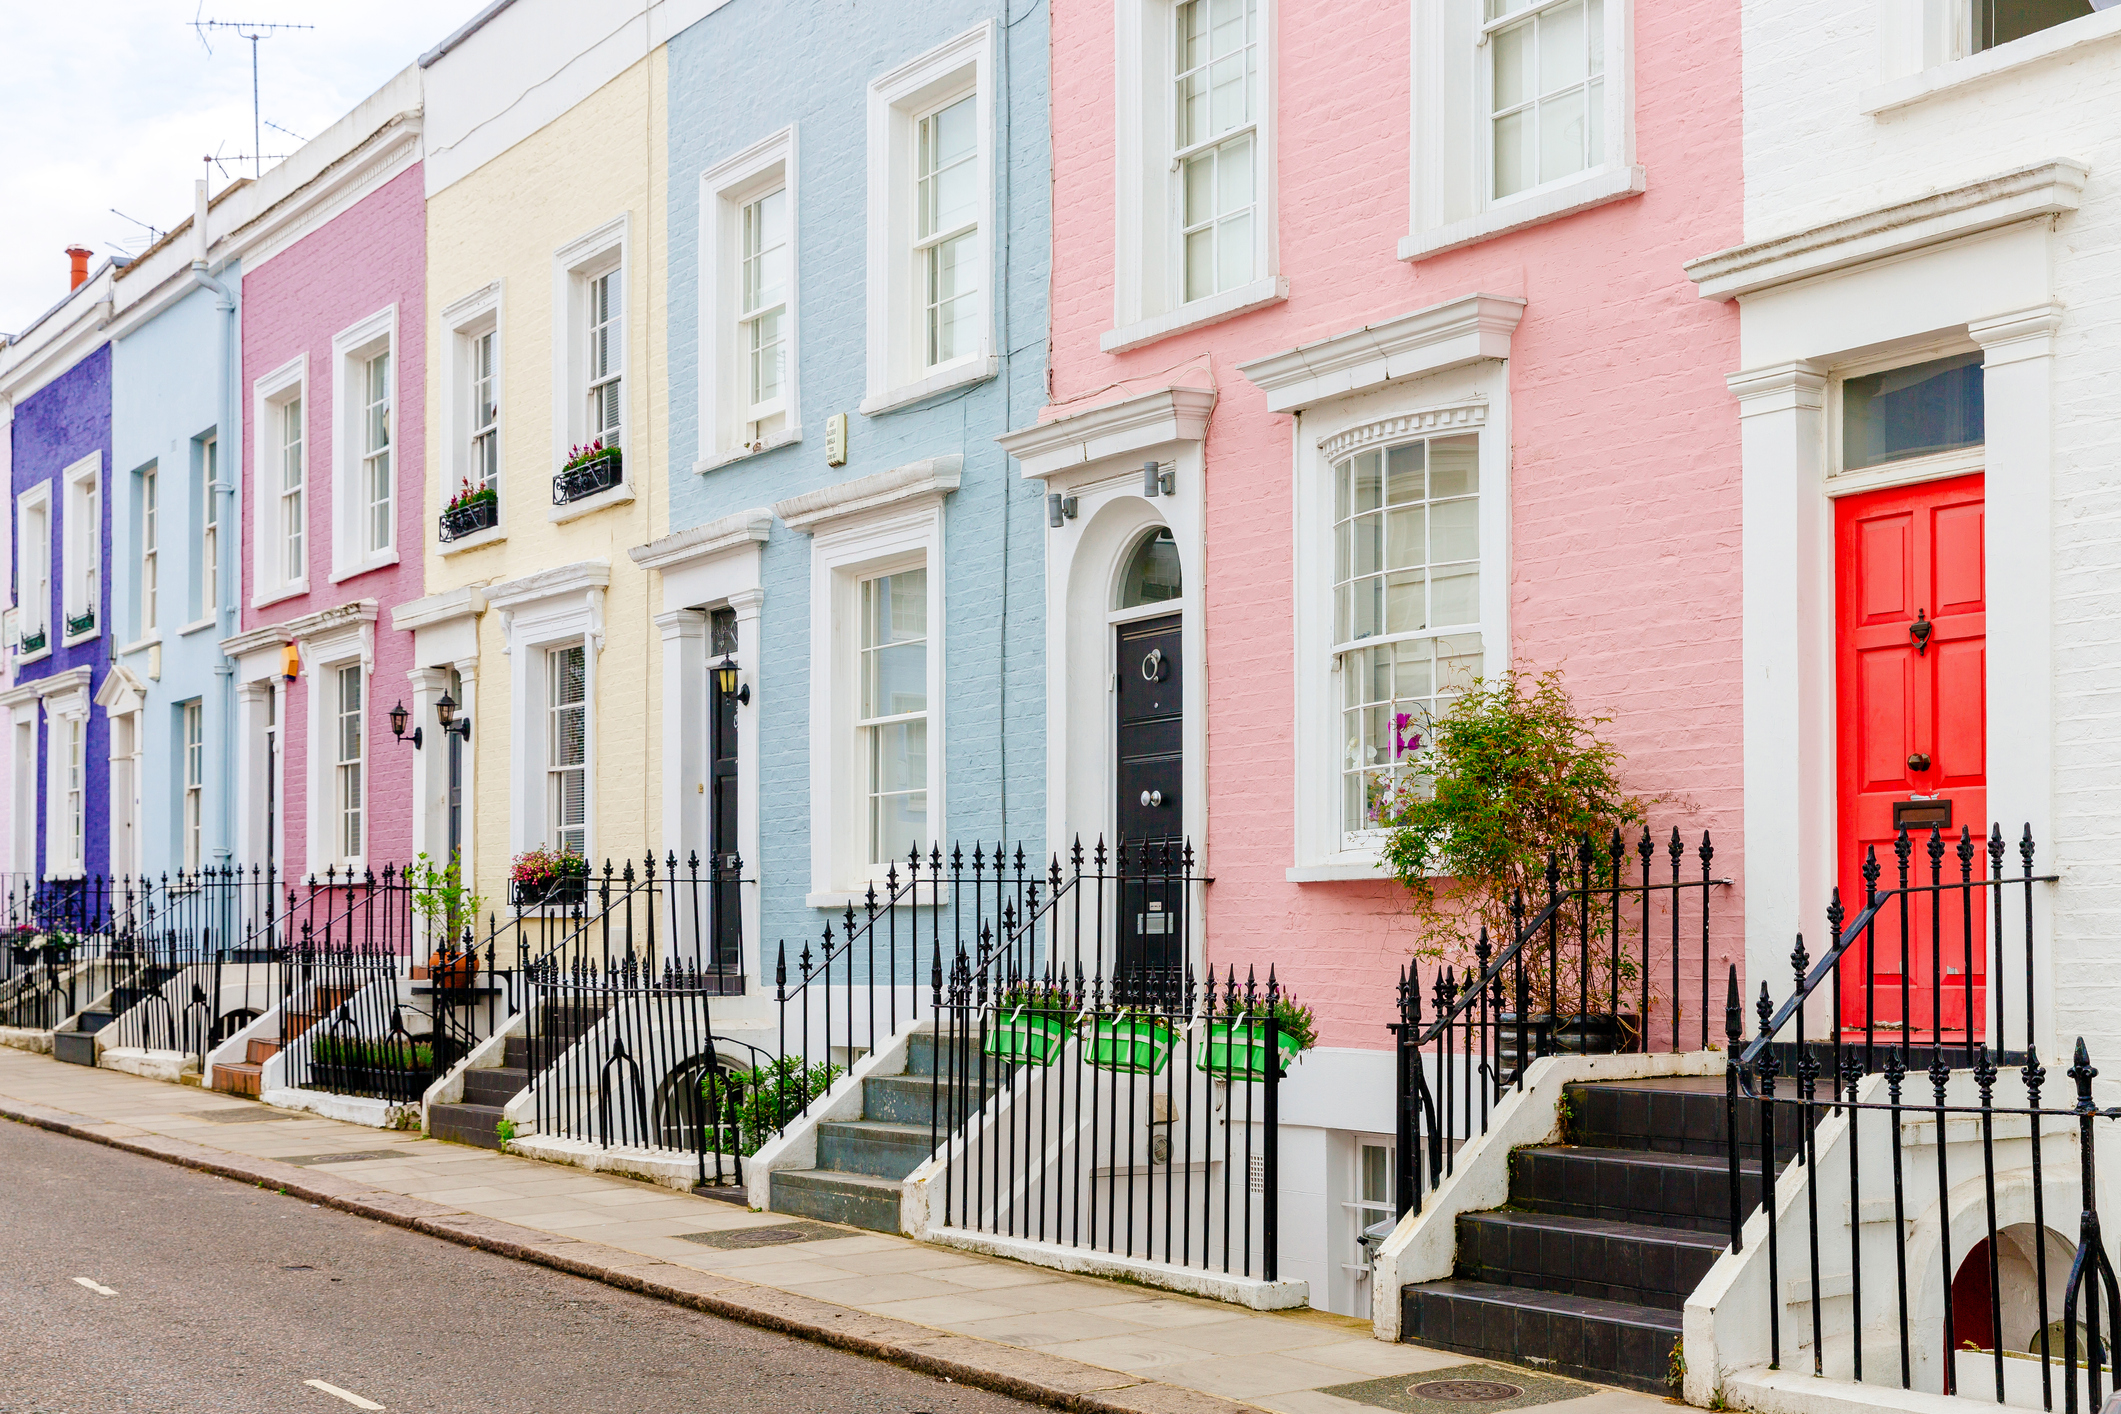 If you are thinking of venturing into property investment, follow these top tips for beginners